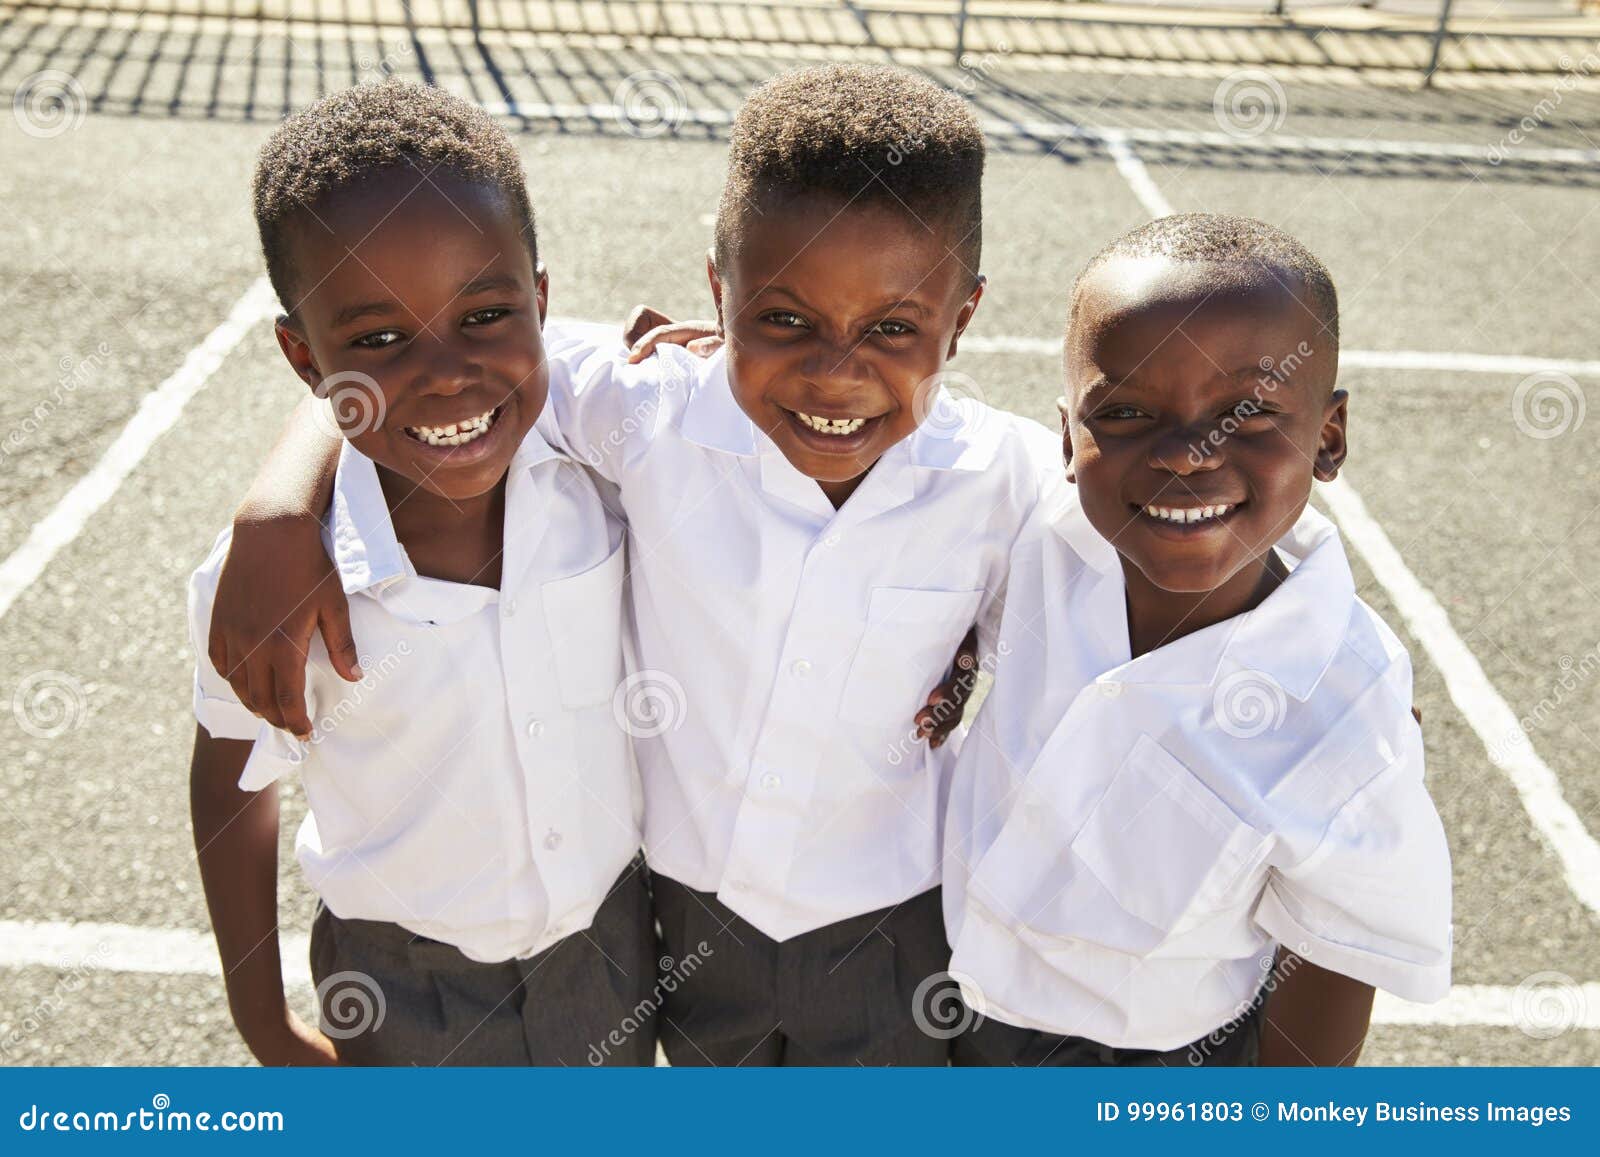 young african schoolboys smiling to camera in a playground